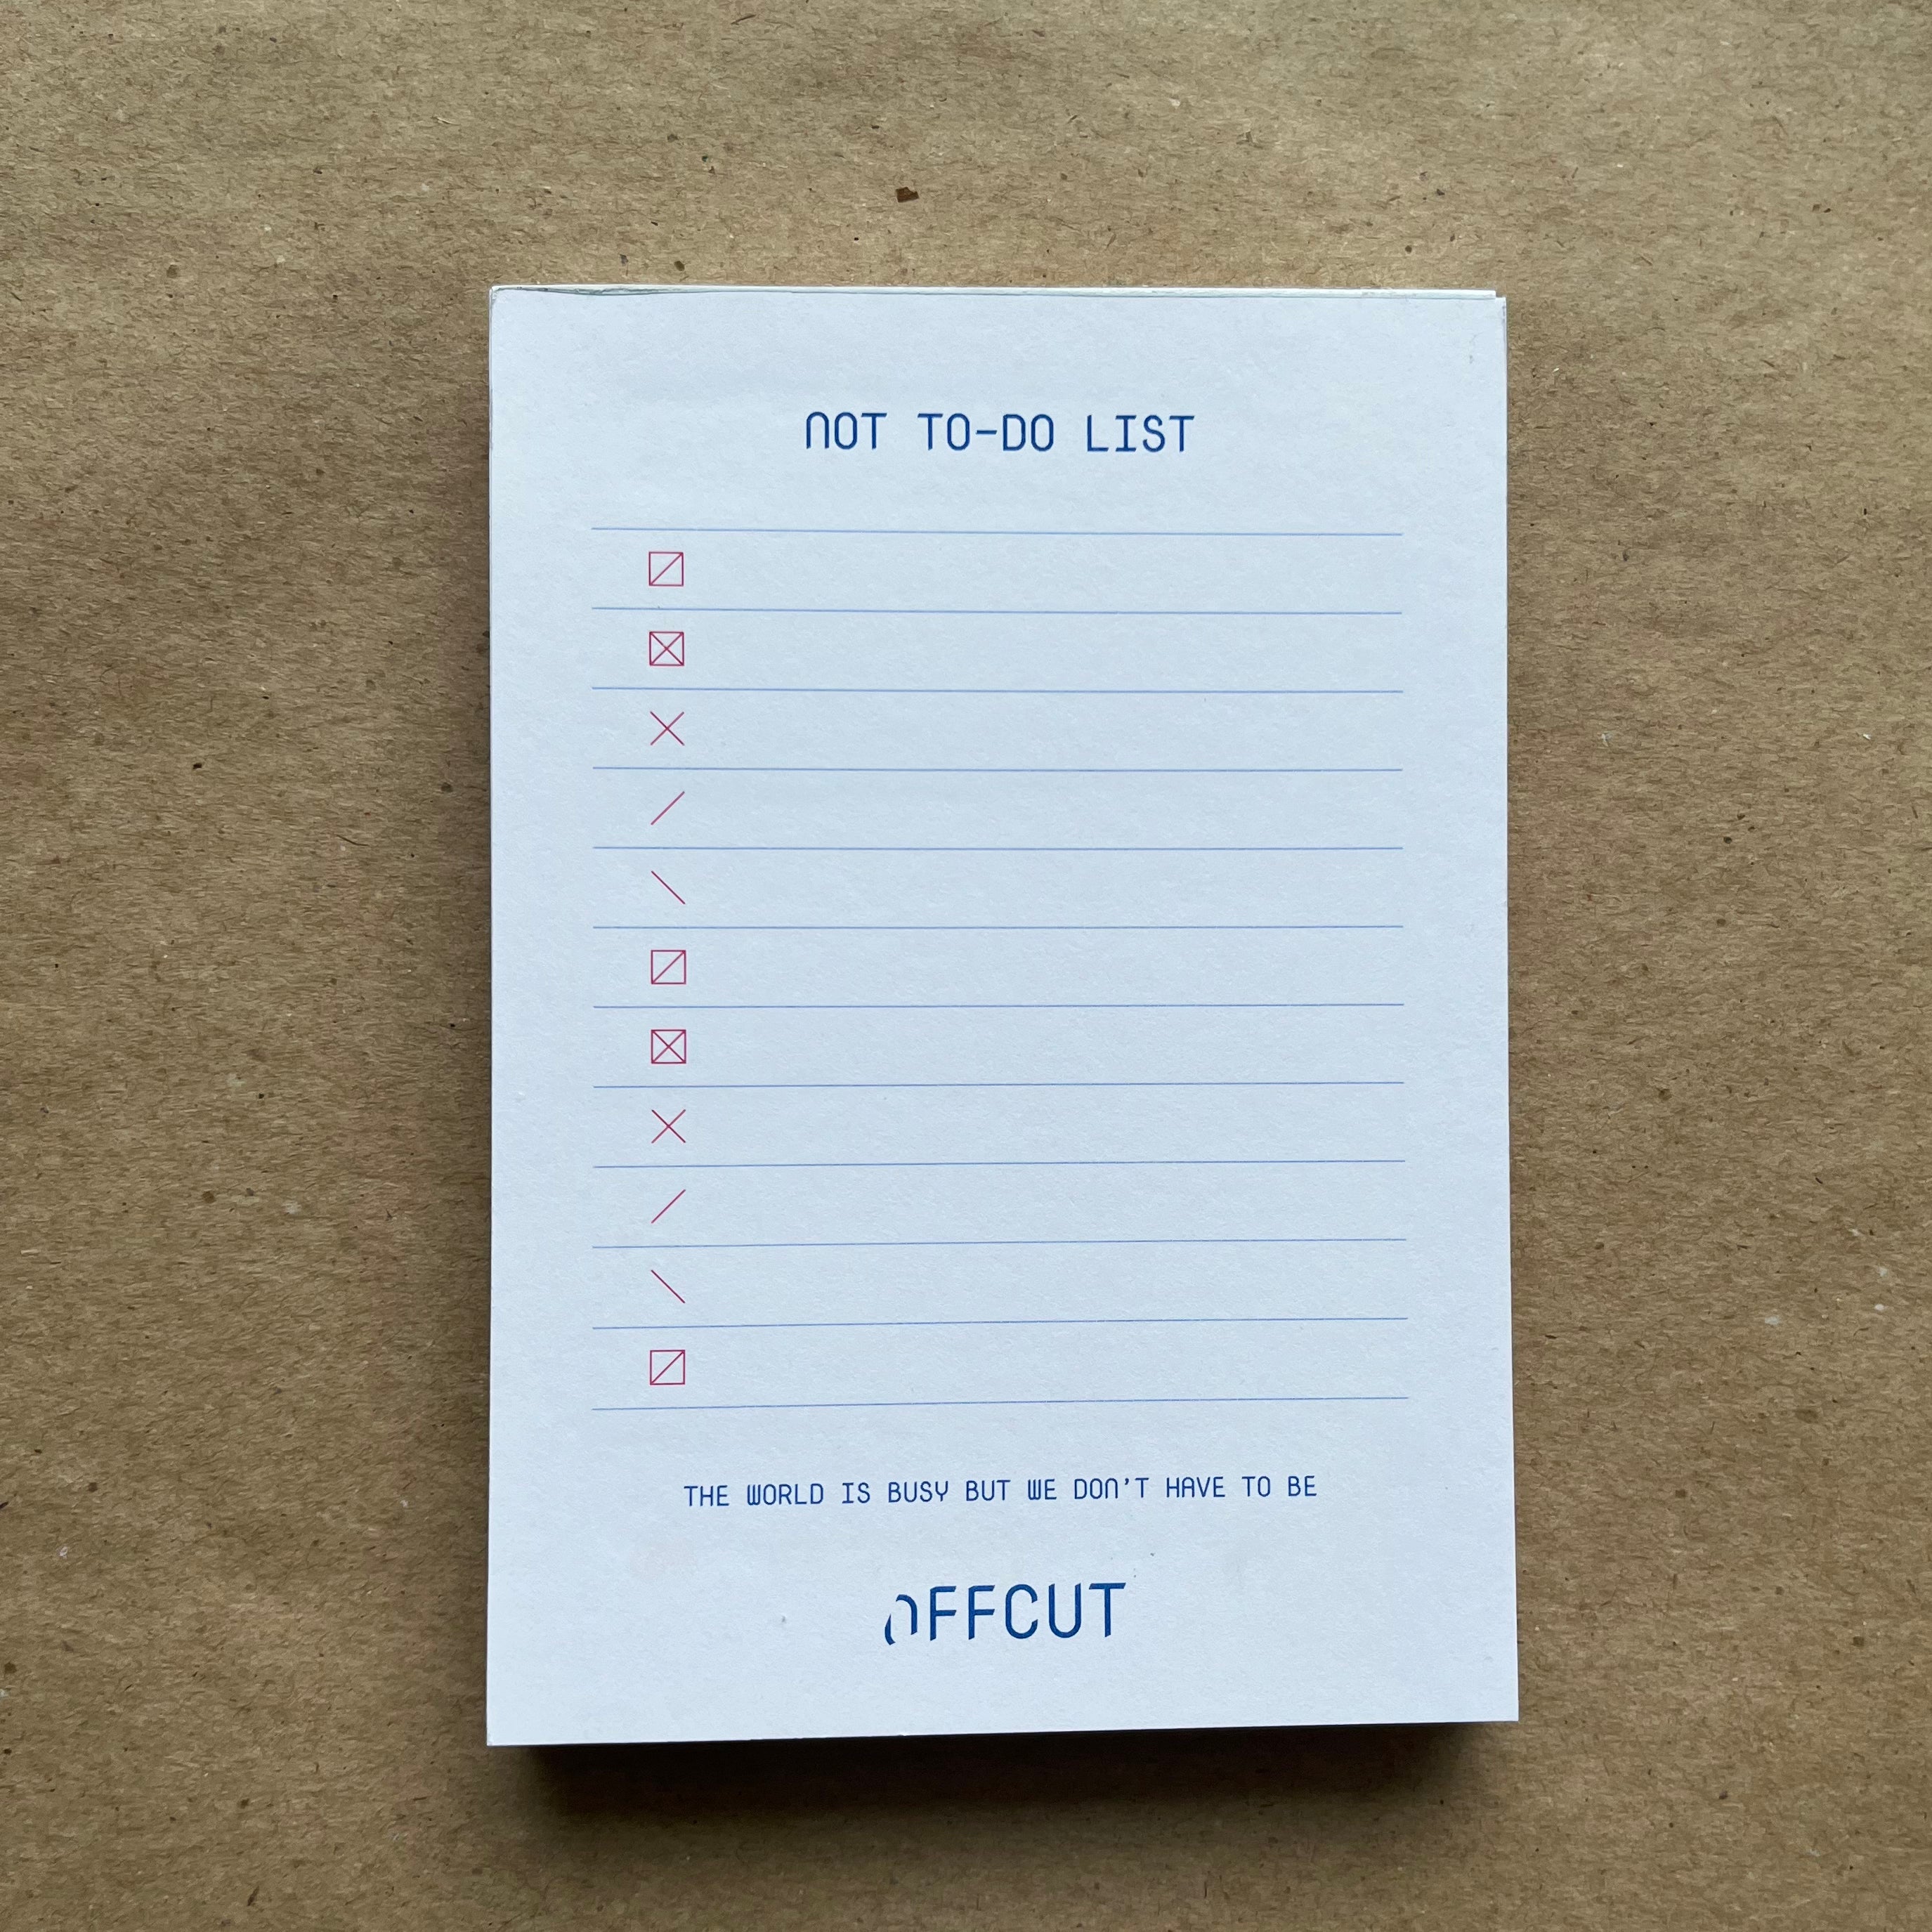 Not To-Do List by OFFCUT